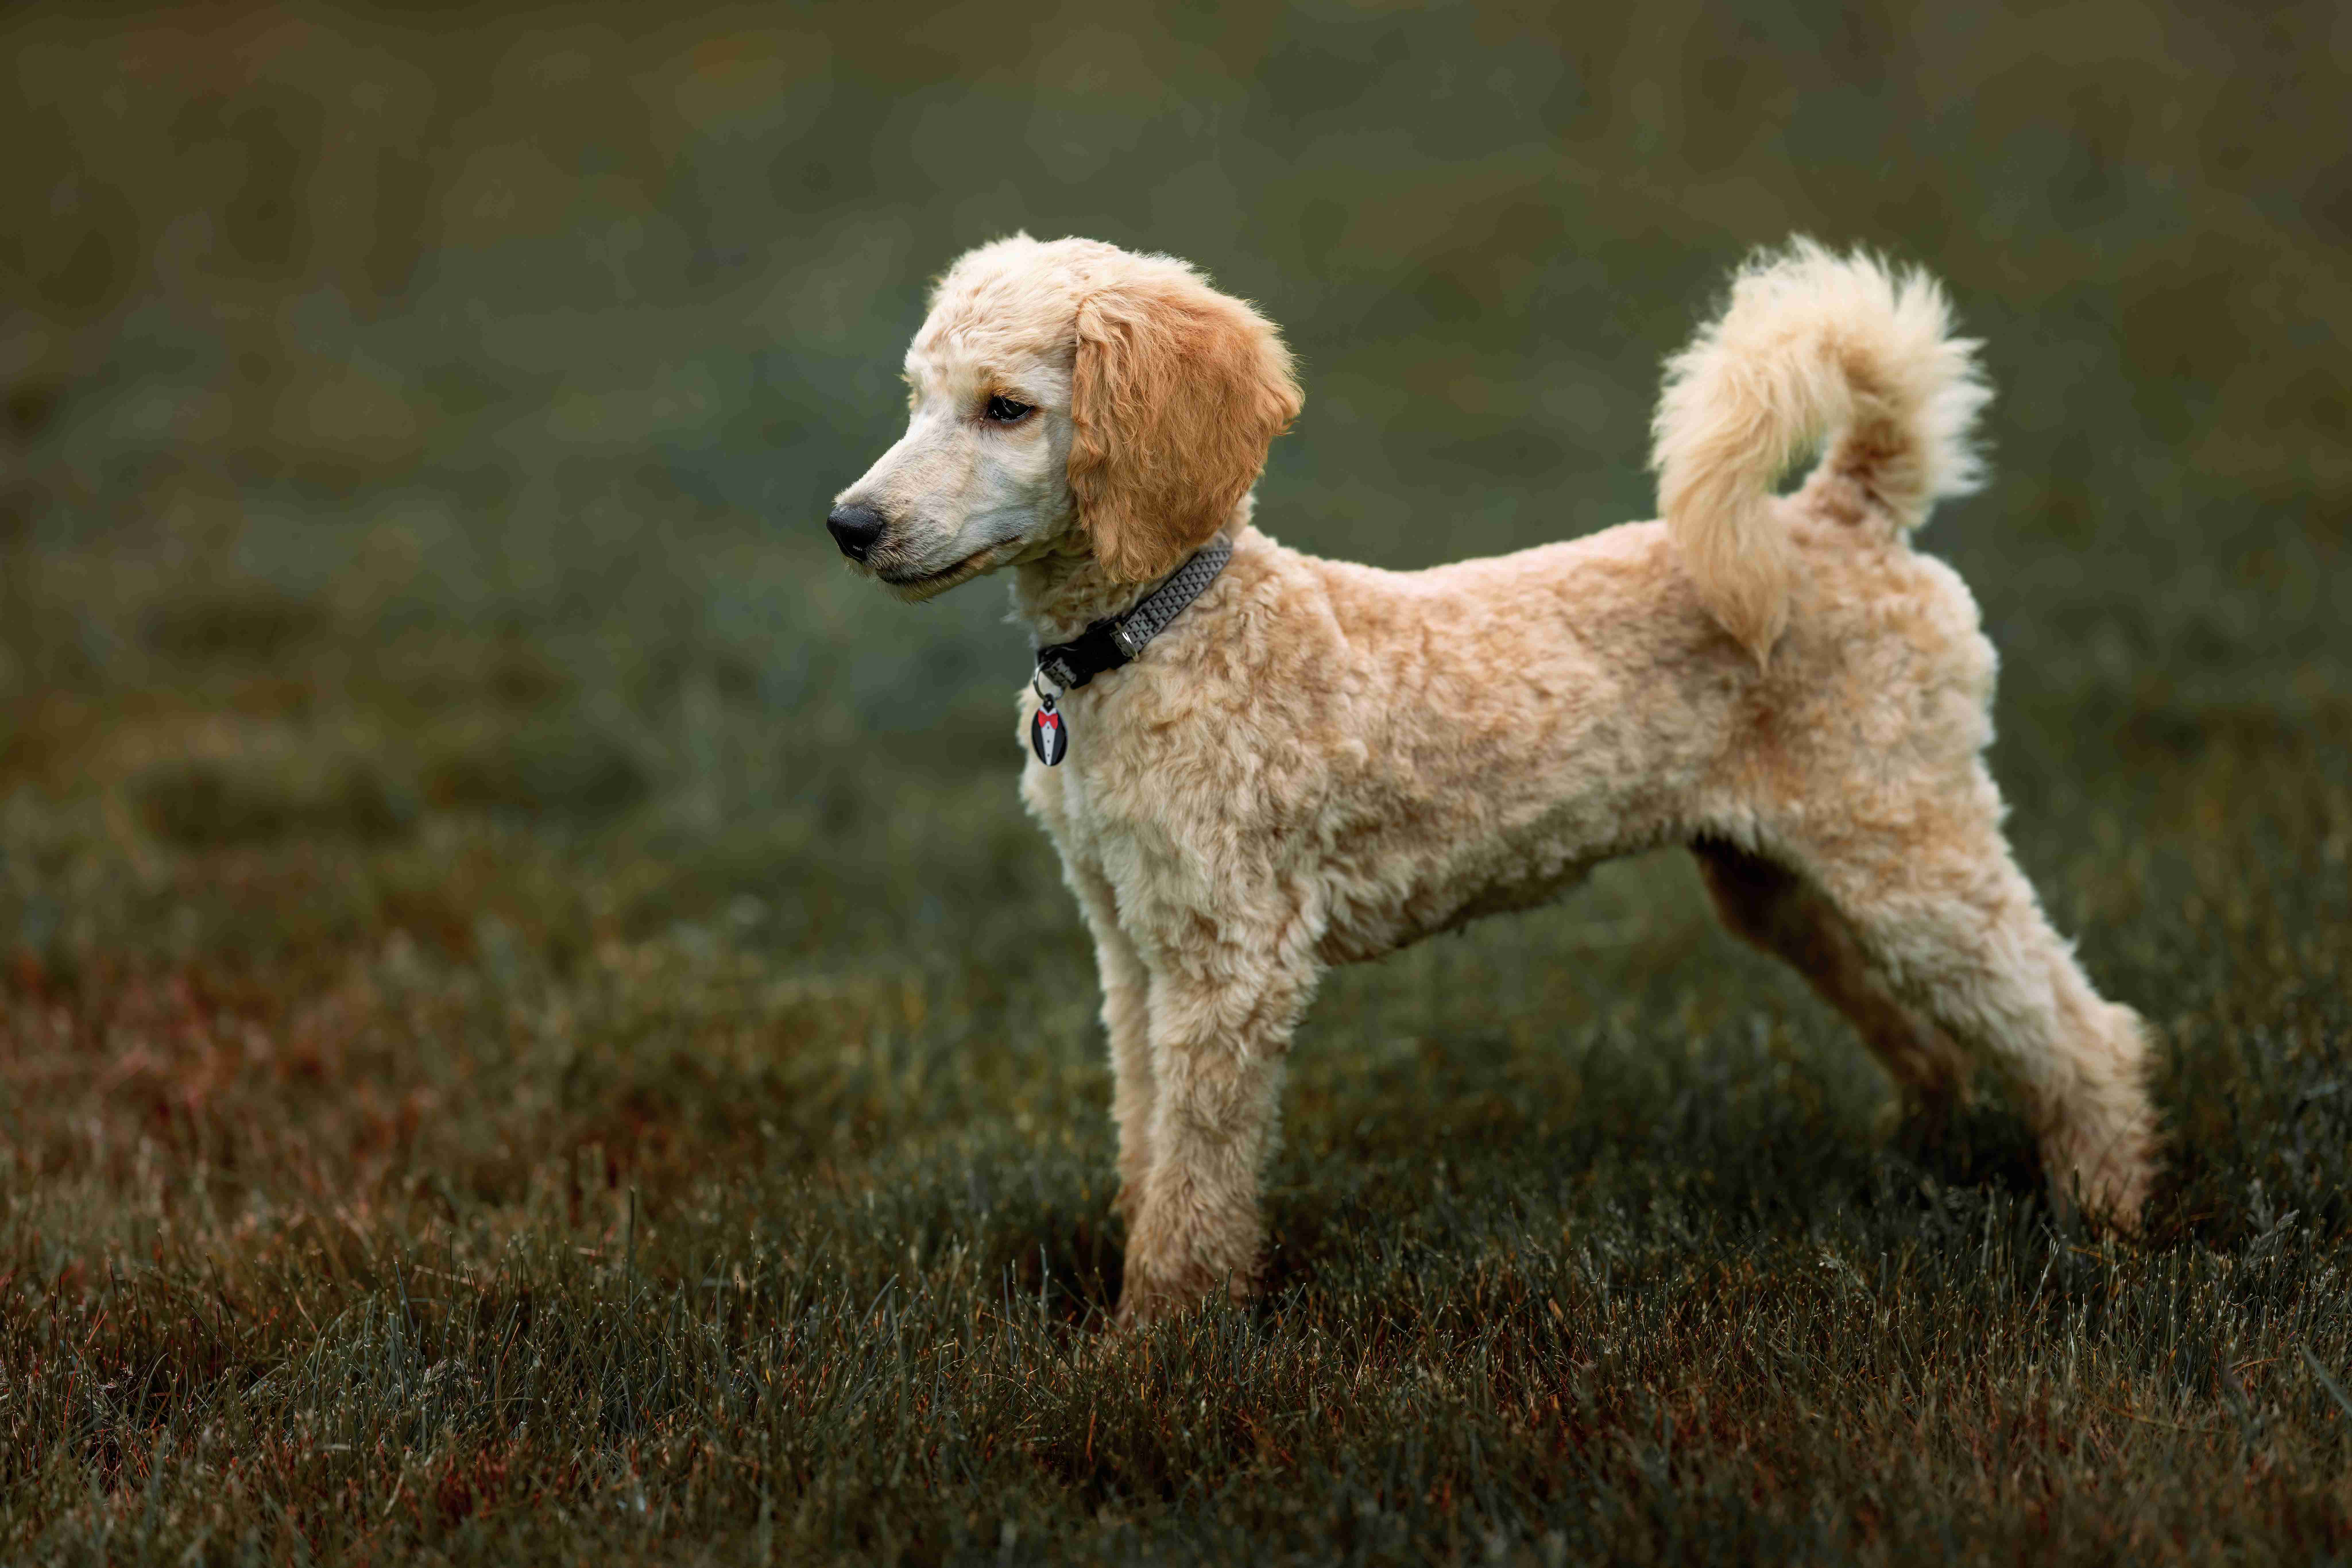 What are the possible treatments for autoimmune diseases in Poodles?